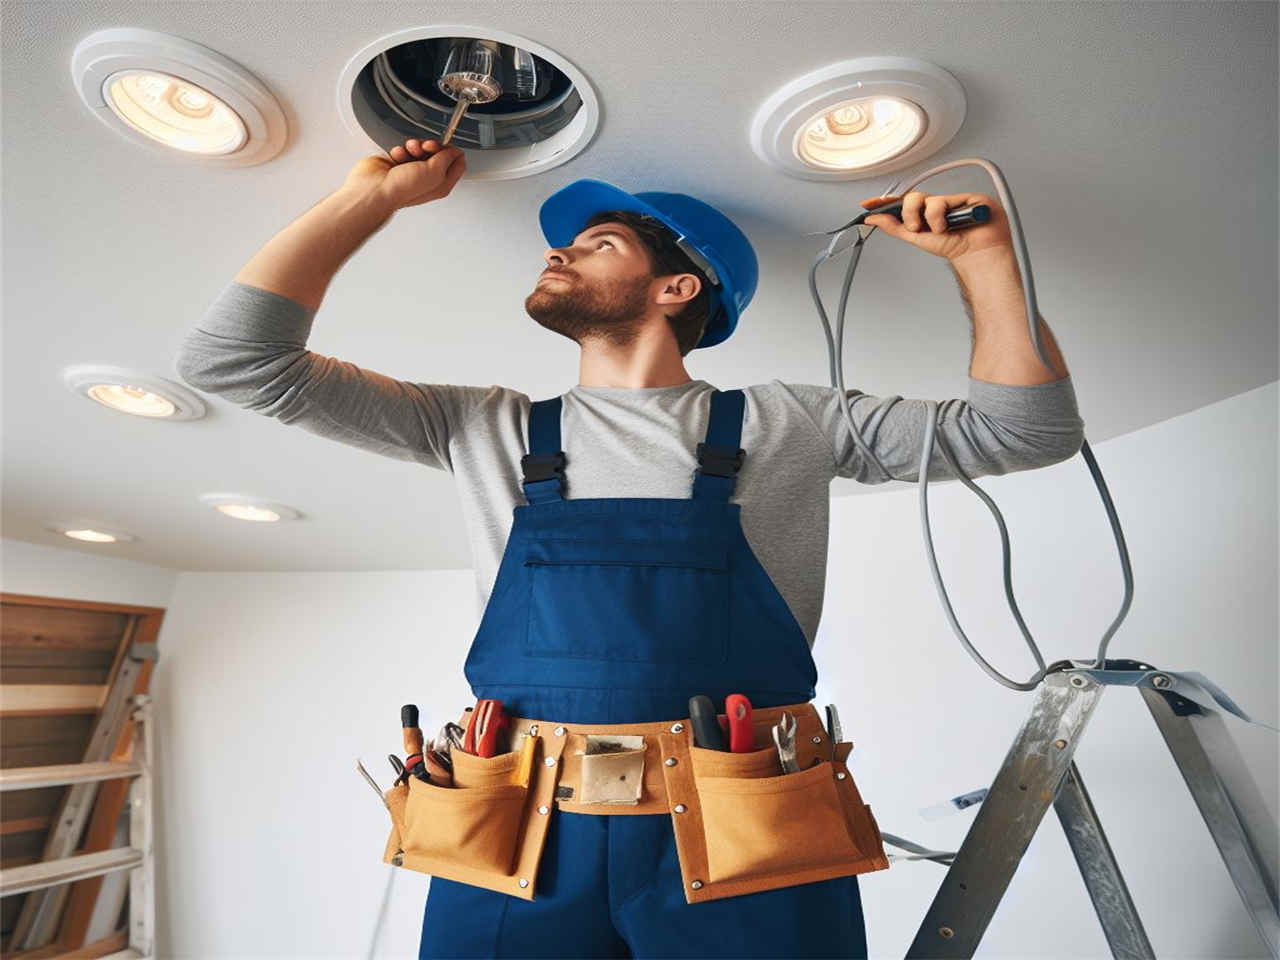 Do I Need an Electrician to Install Recessed Lighting?